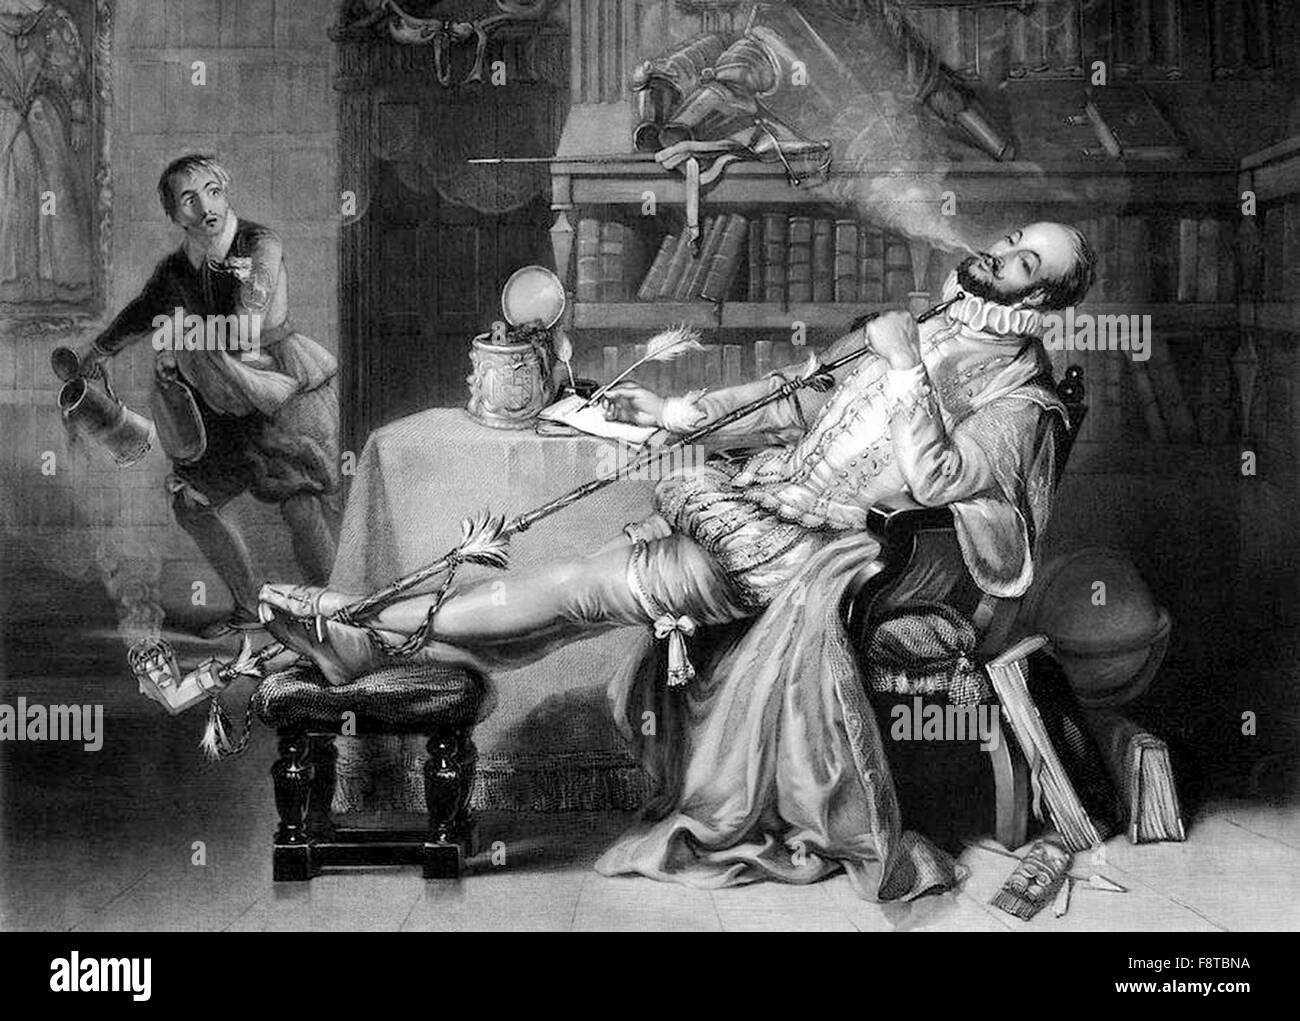 Sir Walter Raleigh fumer du tabac d'une pipe en Angleterre Banque D'Images